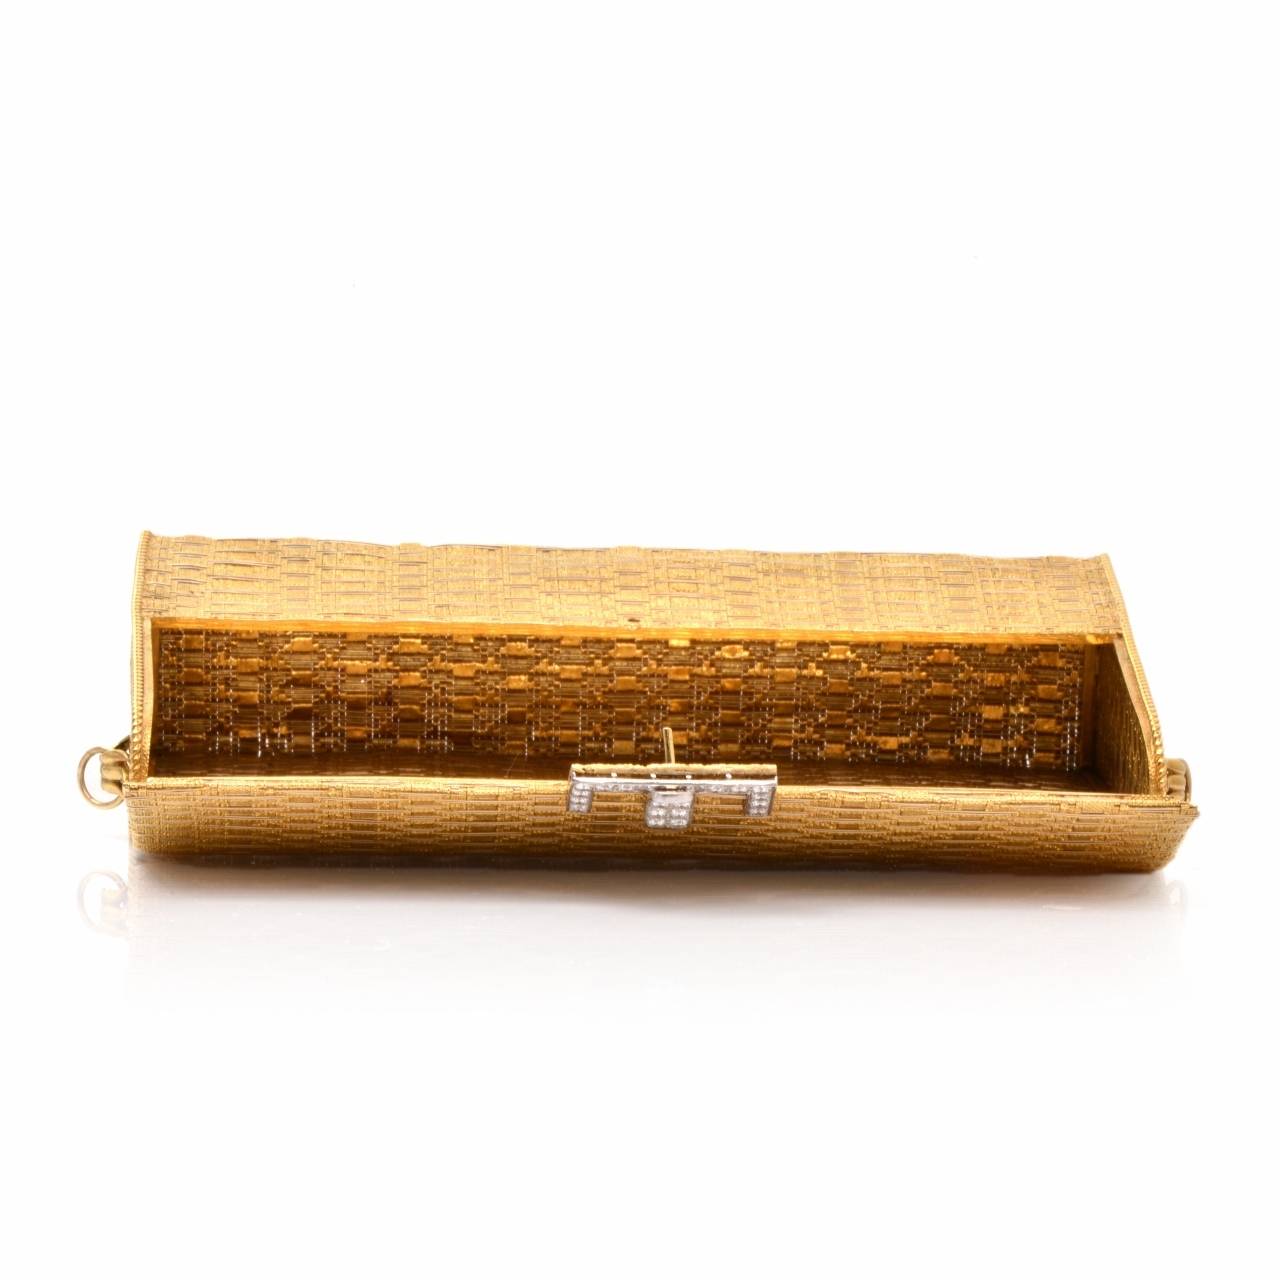 This aesthetically elegant clutch handbag of unsurpassed classic elegance is crafted in solid 18K yellow gold, with a touch of white gold applied to diamond settings.  Rendered in a fascinating woven basket pattern throughout, this immaculately